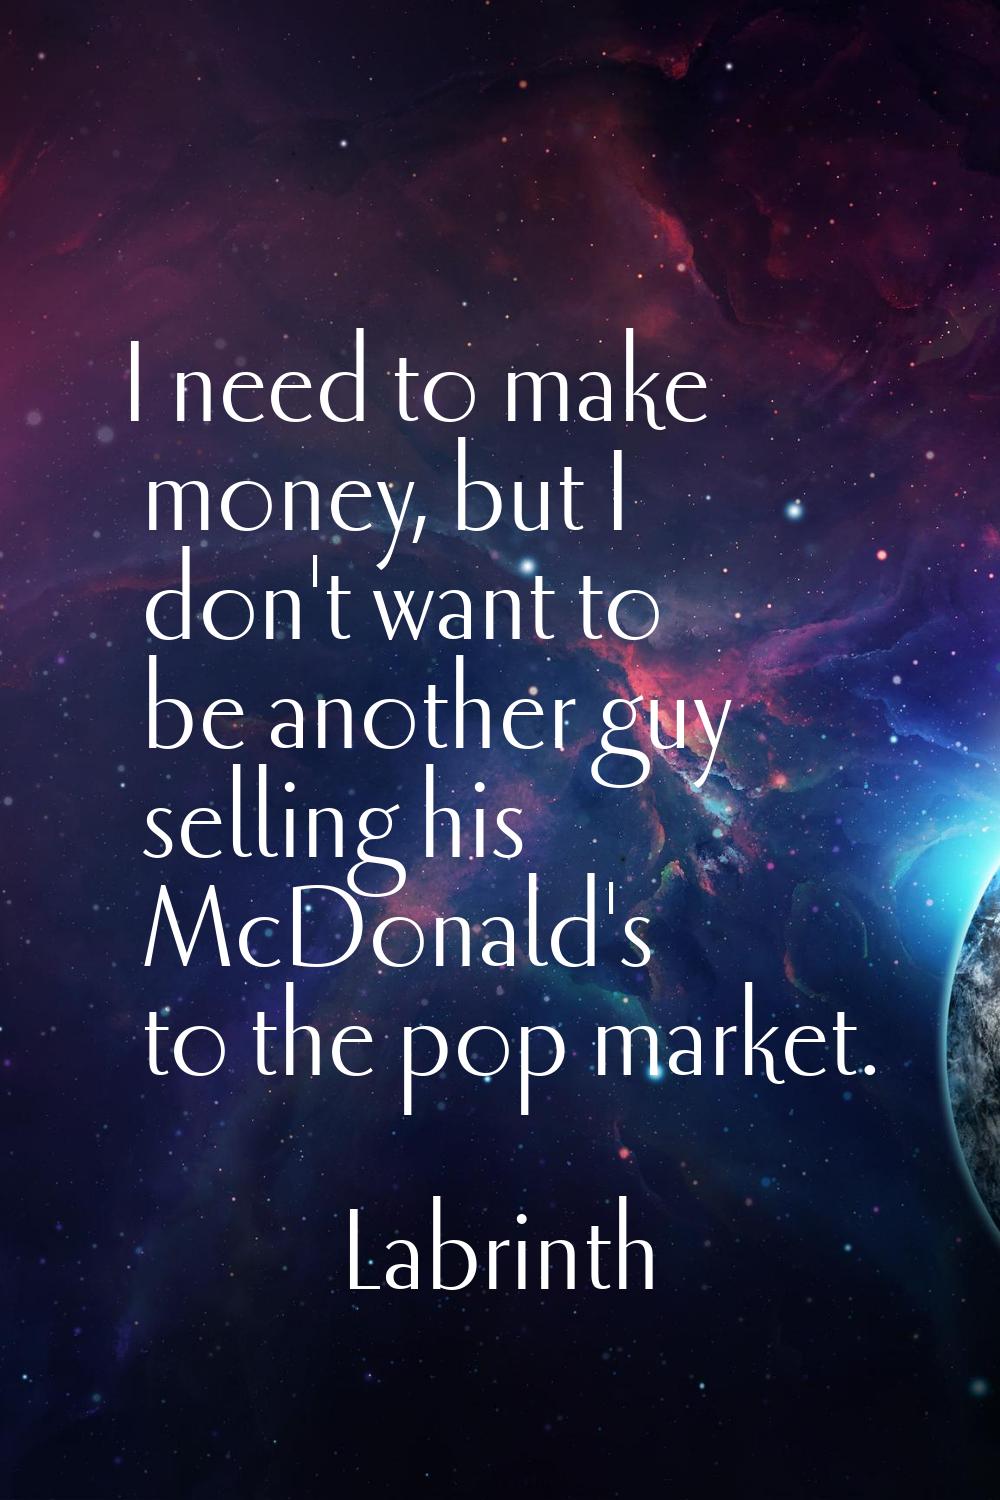 I need to make money, but I don't want to be another guy selling his McDonald's to the pop market.